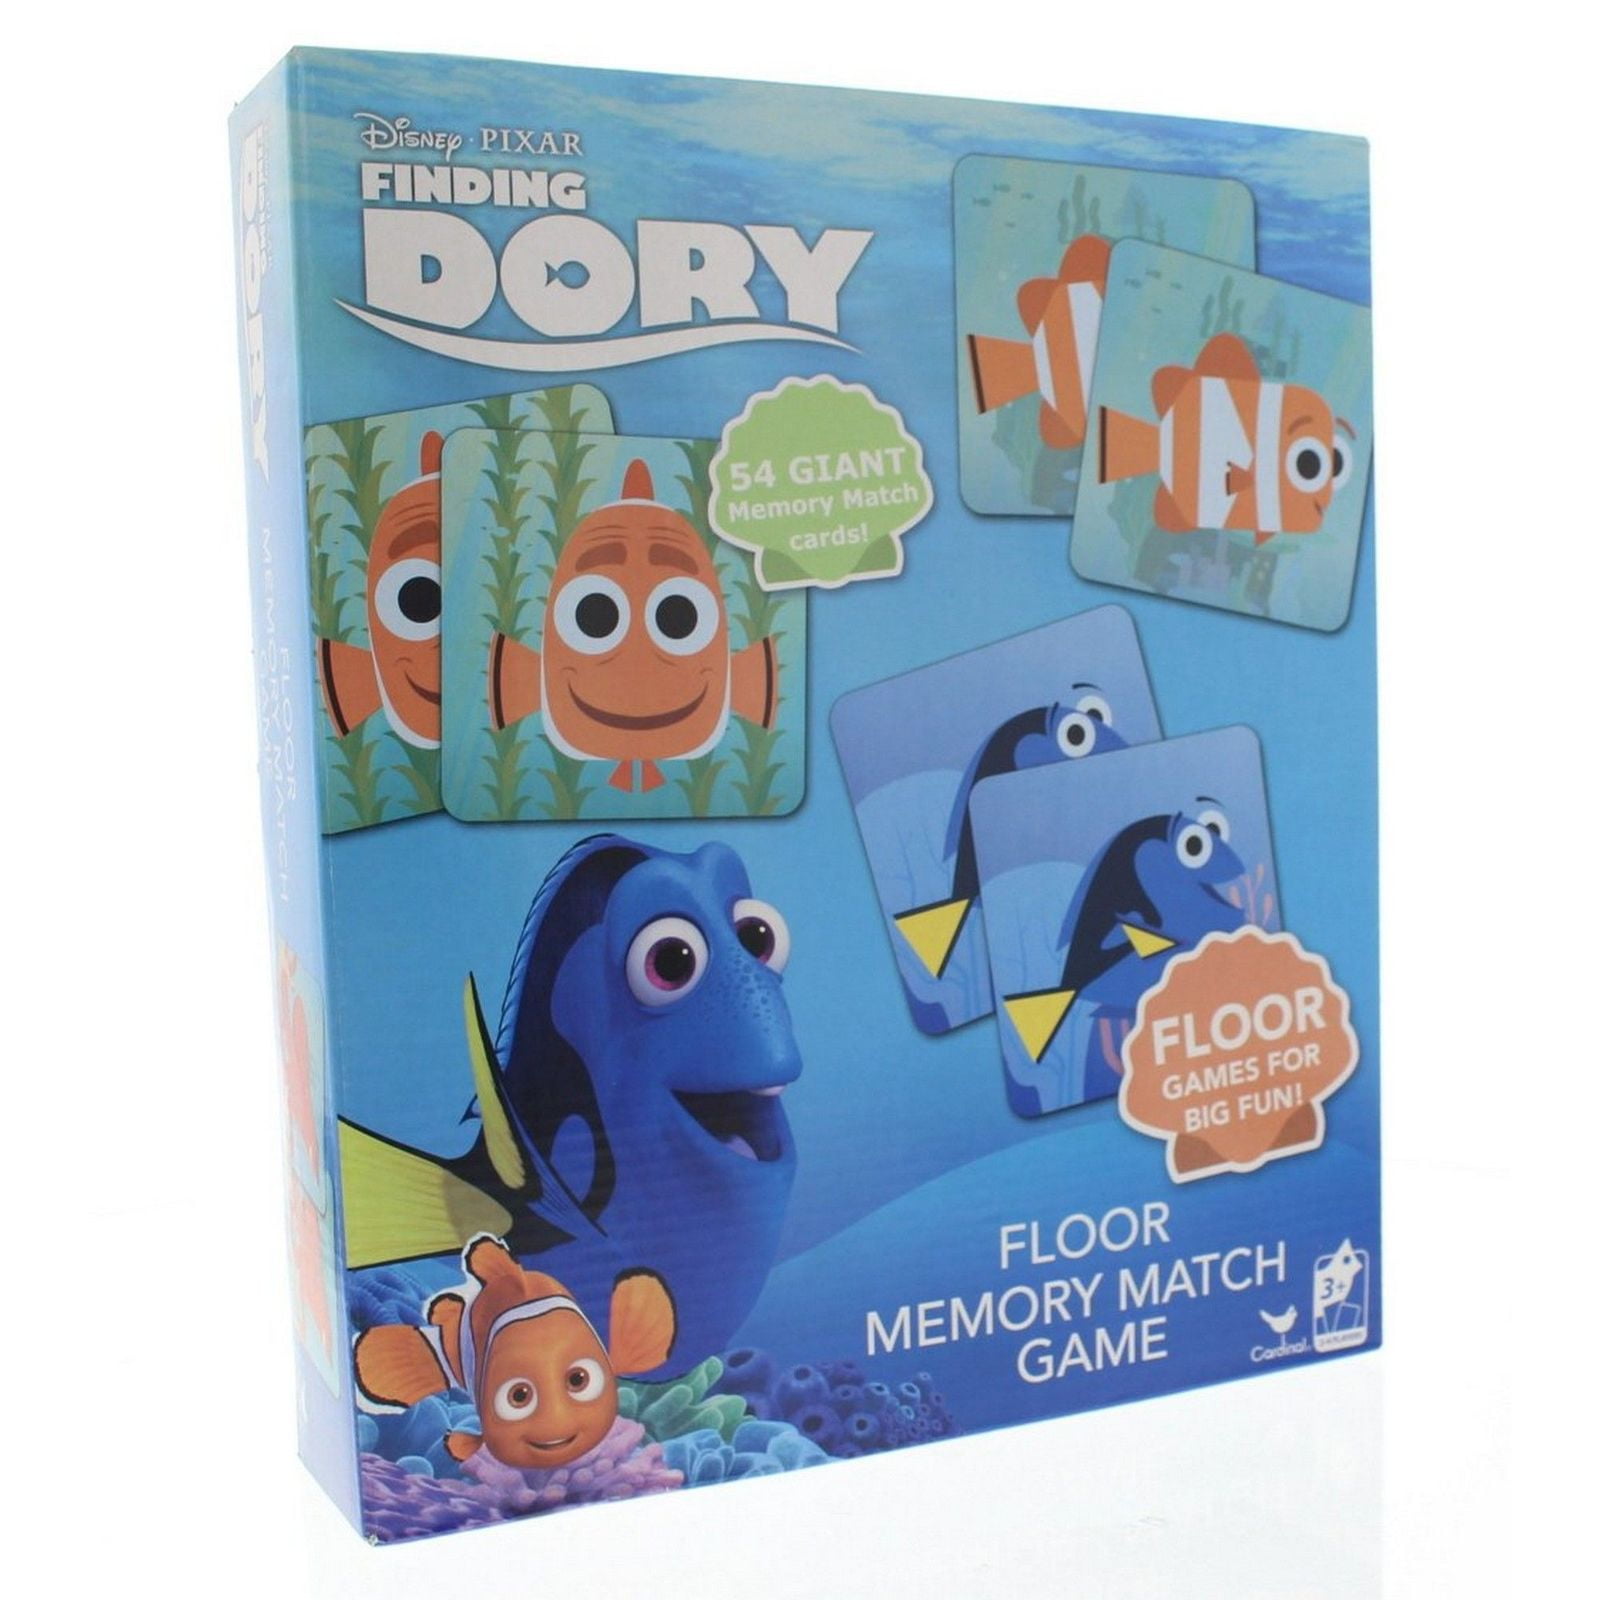 New!! Finding Dory Memory Match Game Fast Same Day USPS 1st Class Shipping 